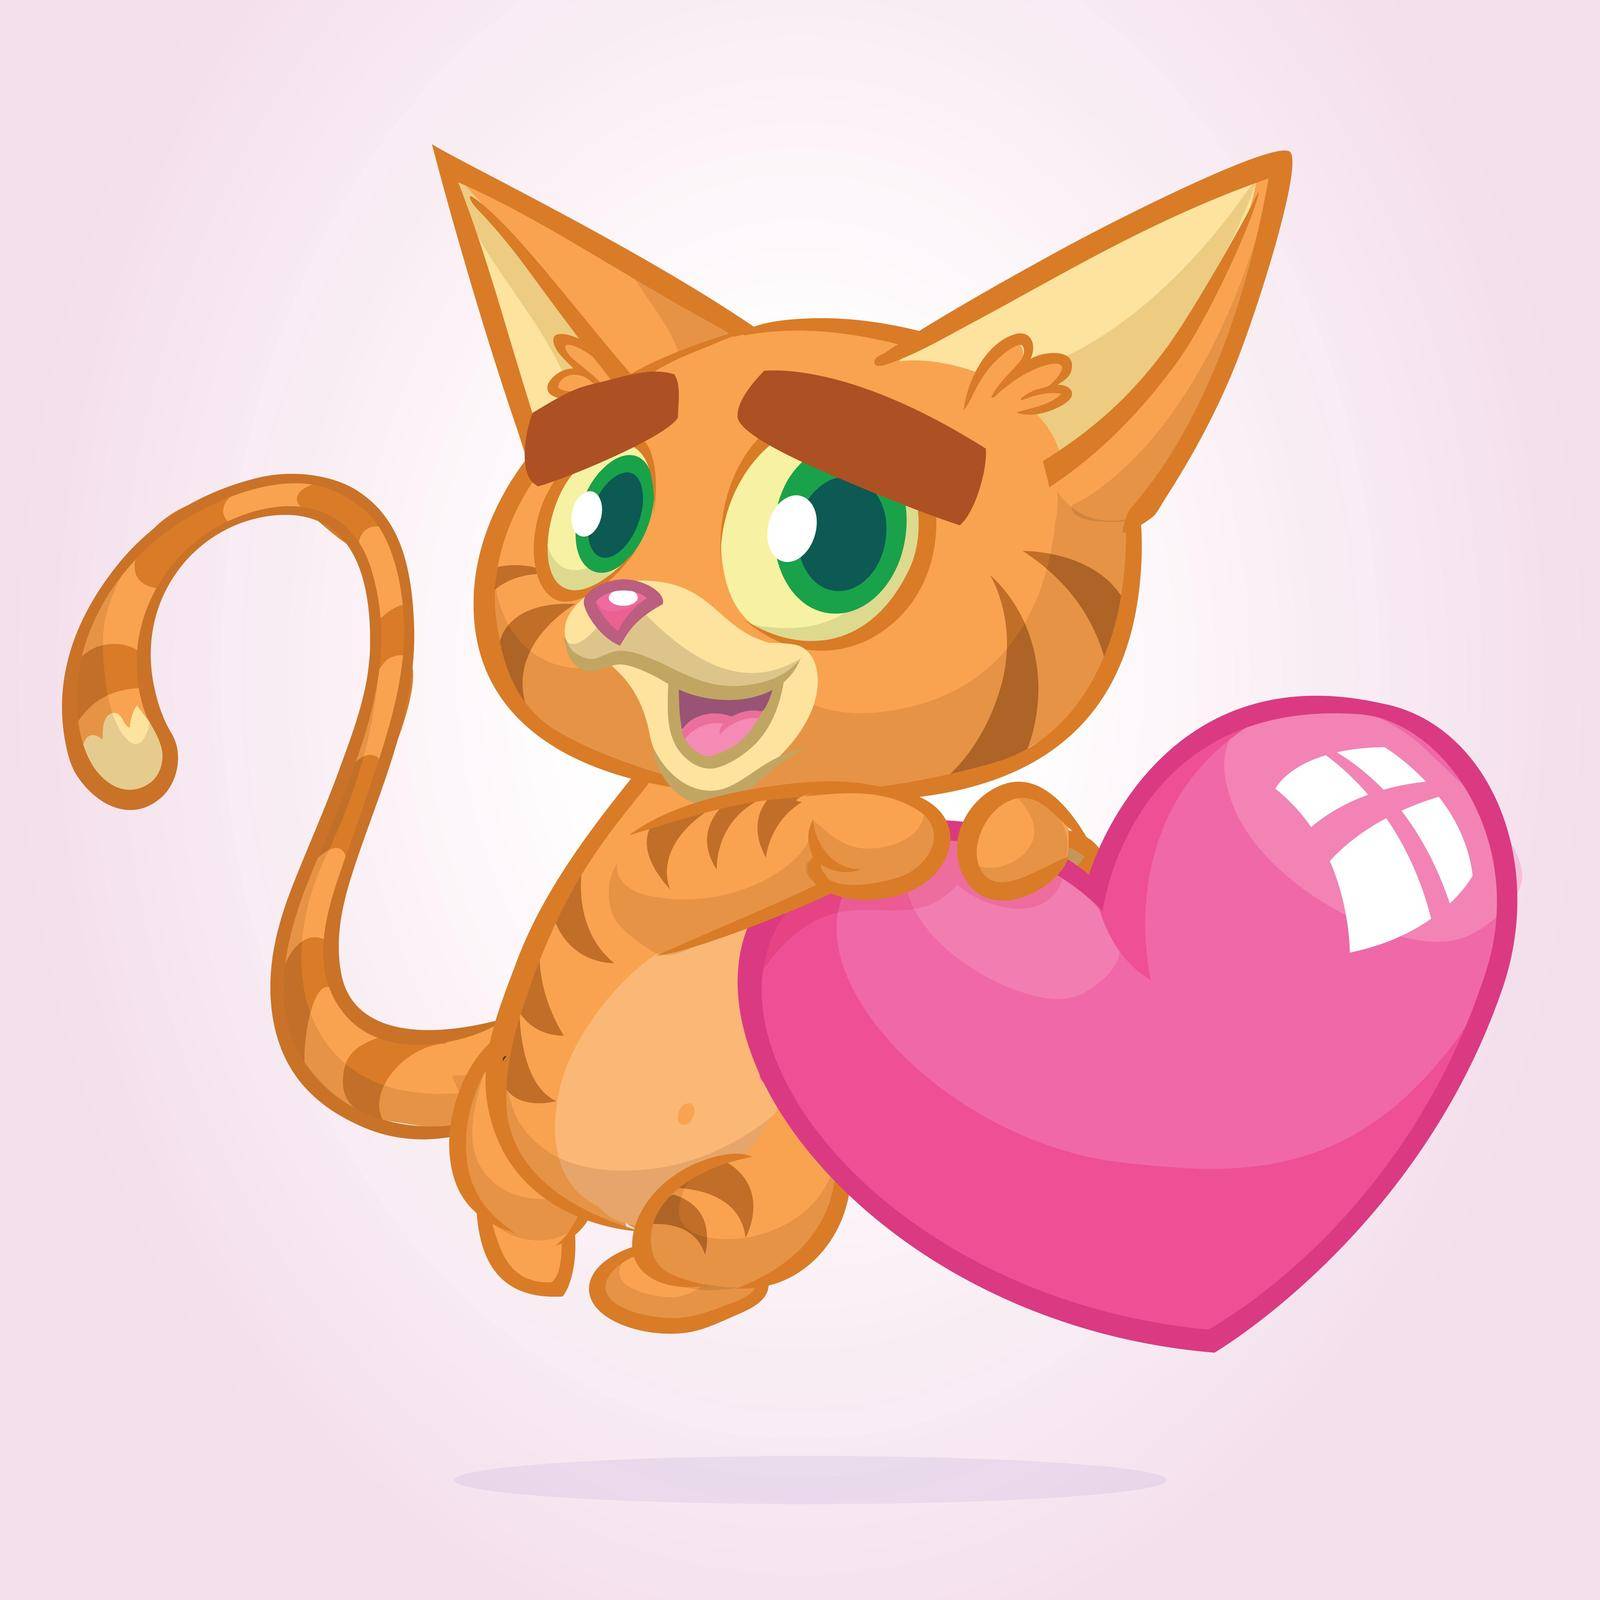 Cartoon funny kitty holding a heart love. Vector illustration for St Valentines Day. Isolated